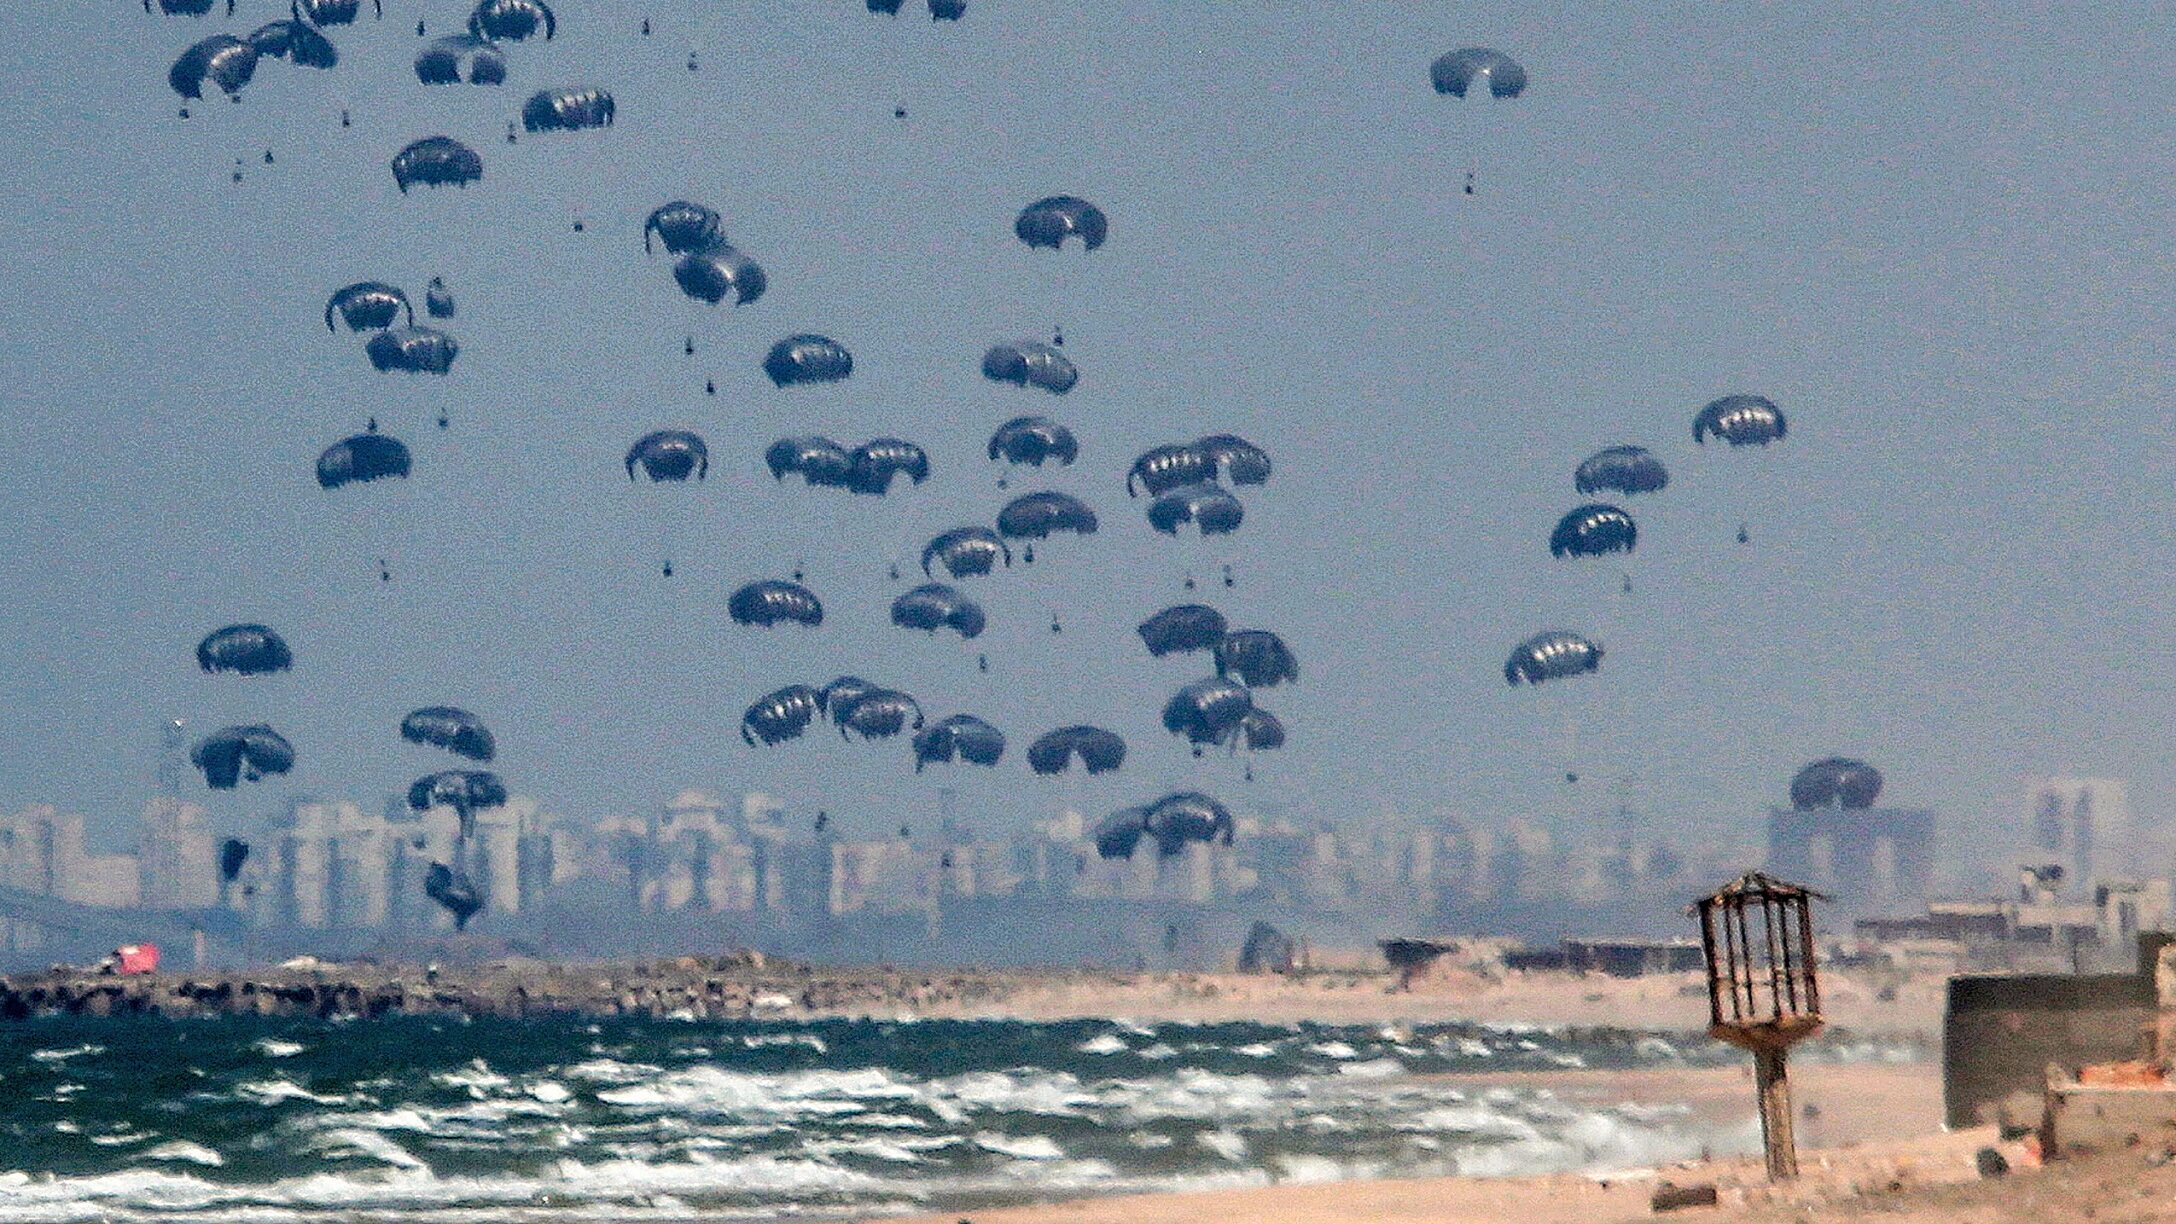 Gaza Authorities: Desperate Rush for Airdropped Aid Results in Multiple Drownings